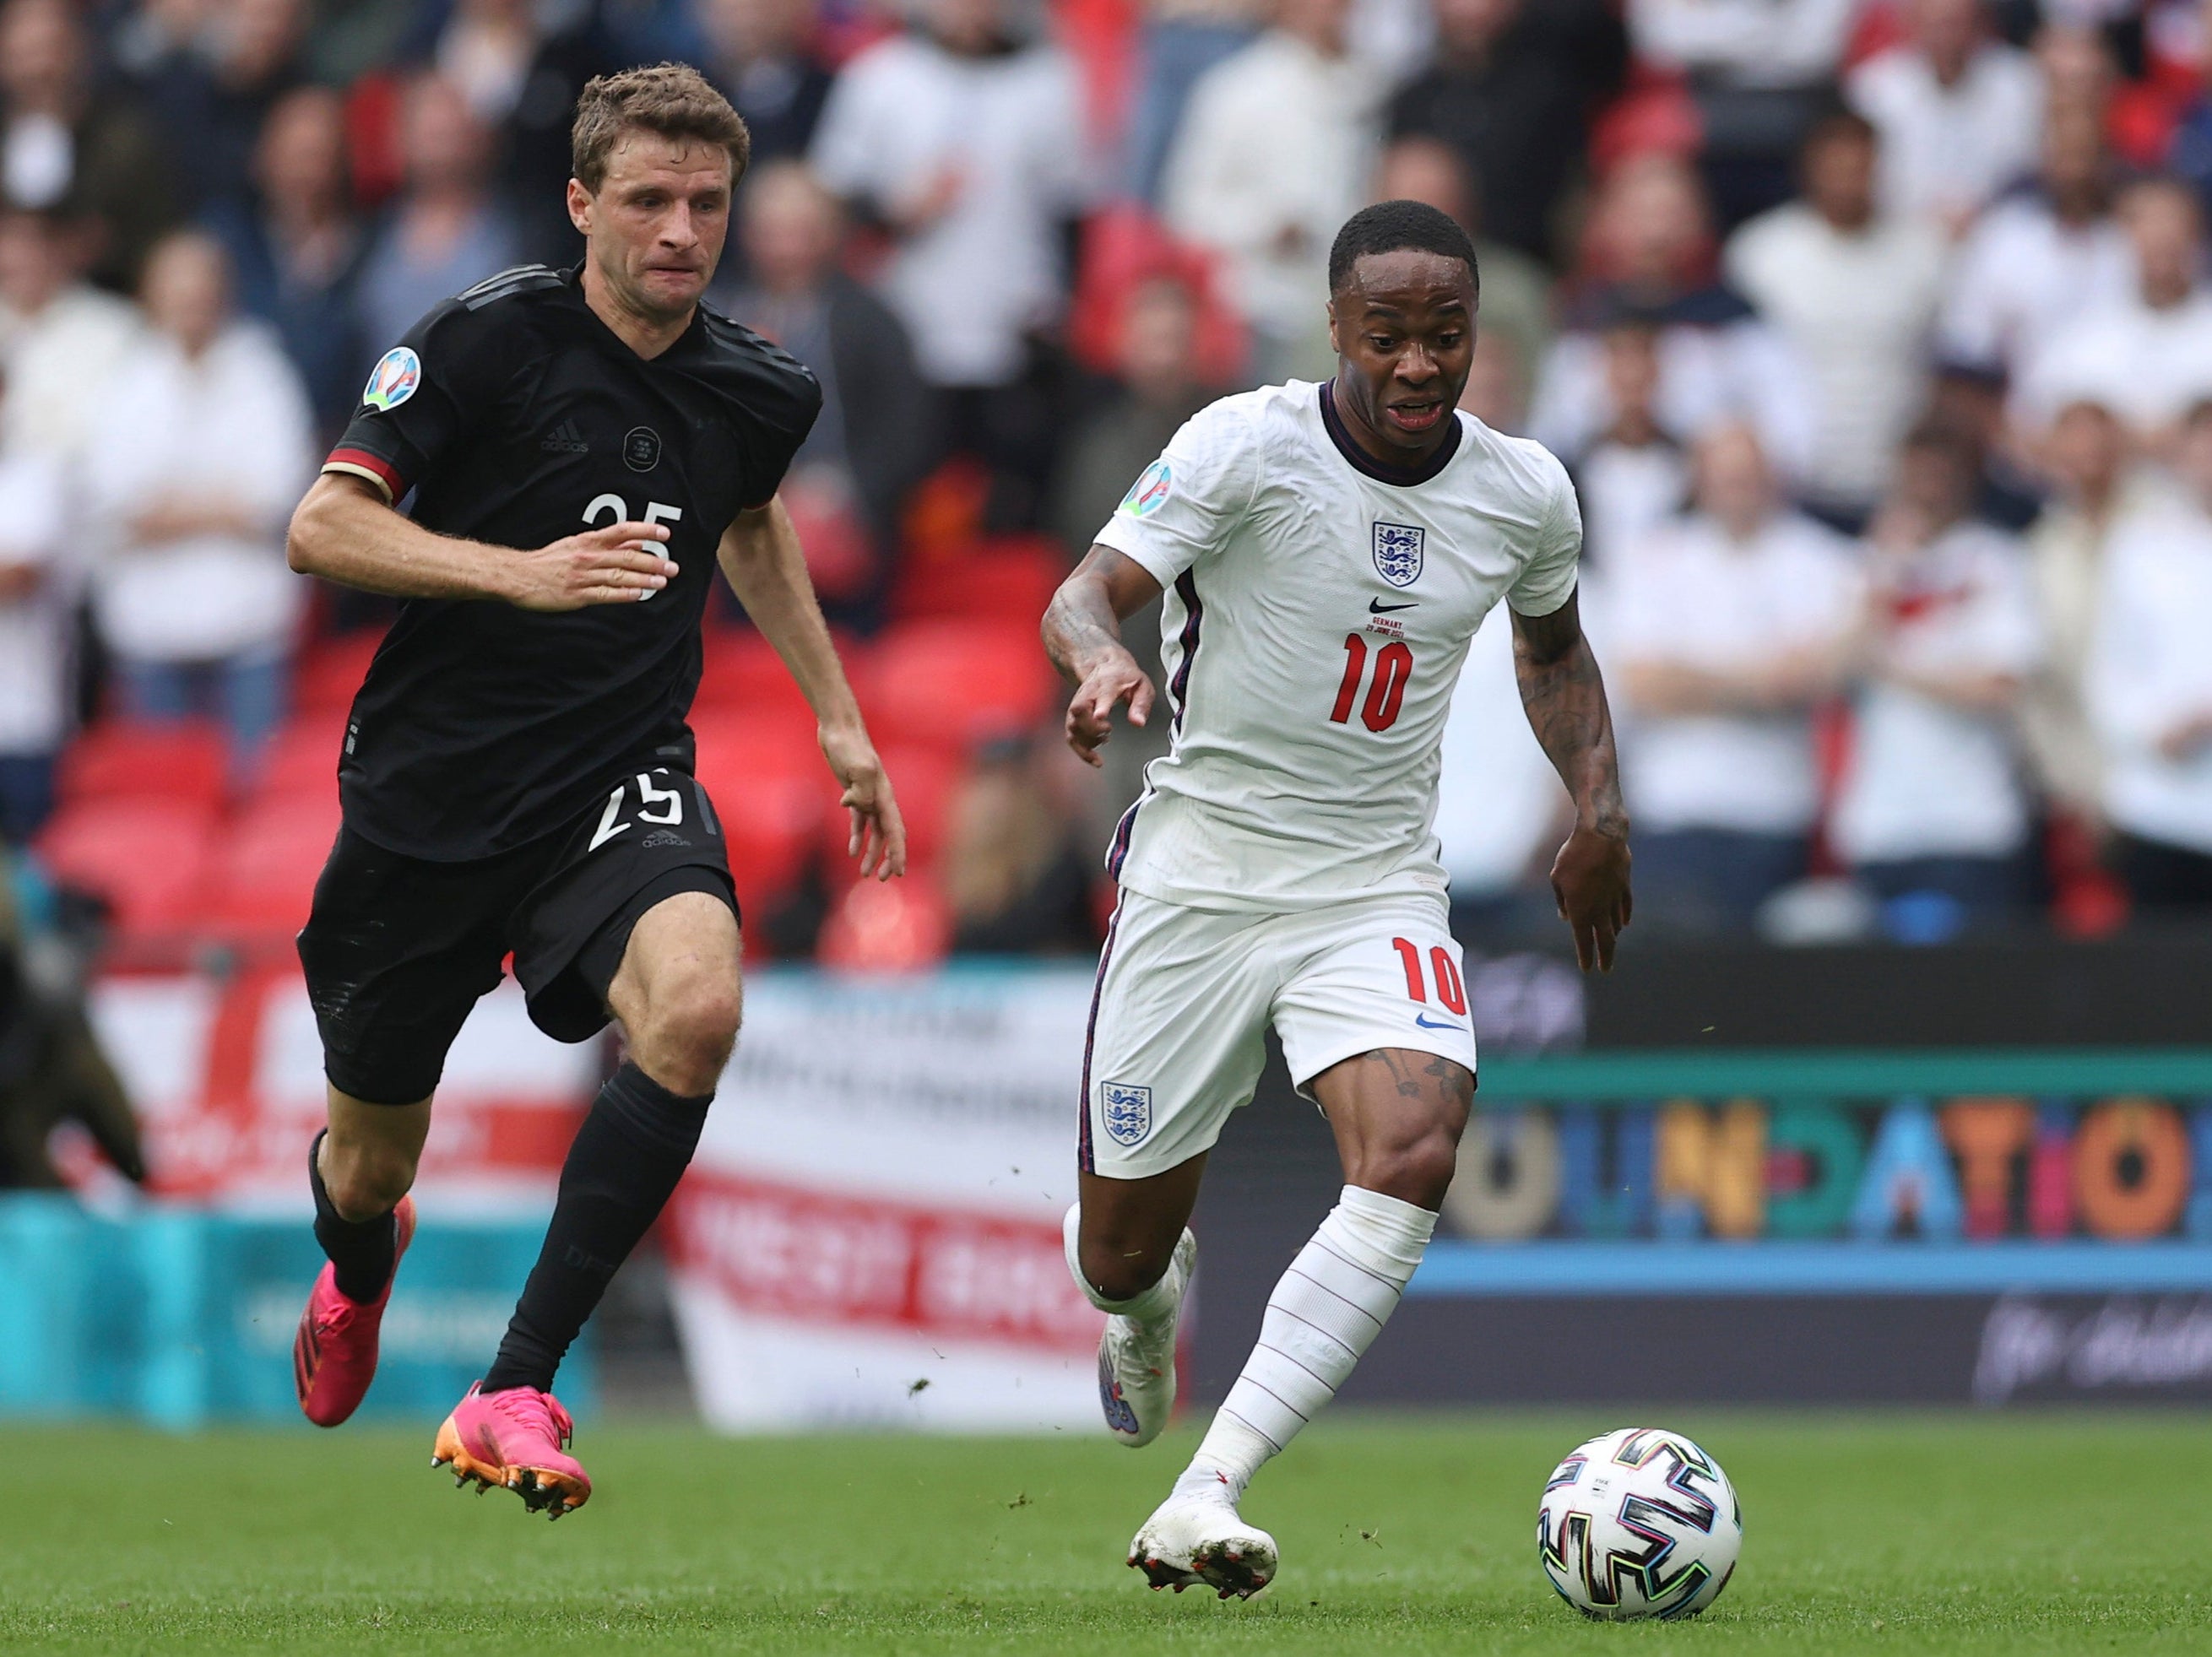 Raheem Sterling is challenged by Thomas Mueller when England met Germany at Wembley on Tuesday